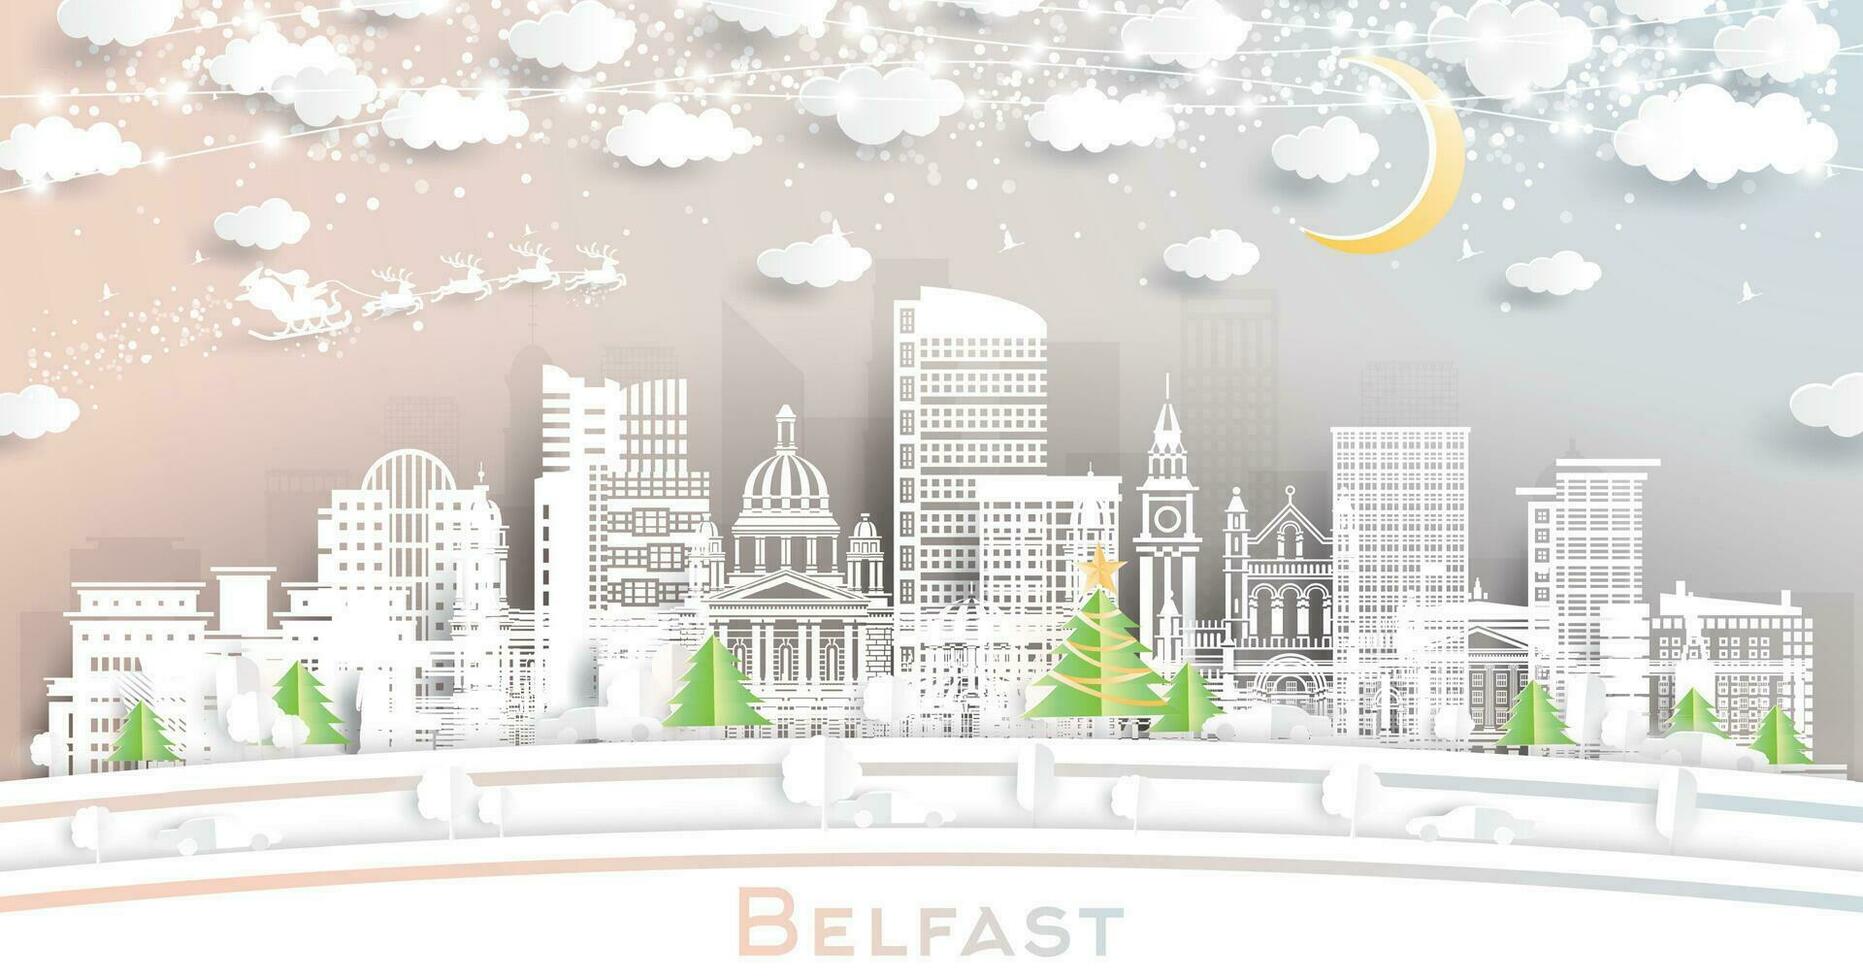 Belfast Northern Ireland. Winter City Skyline in Paper Cut Style with Snowflakes, Moon and Neon Garland. Christmas, New Year Concept. Belfast Cityscape with Landmarks. vector